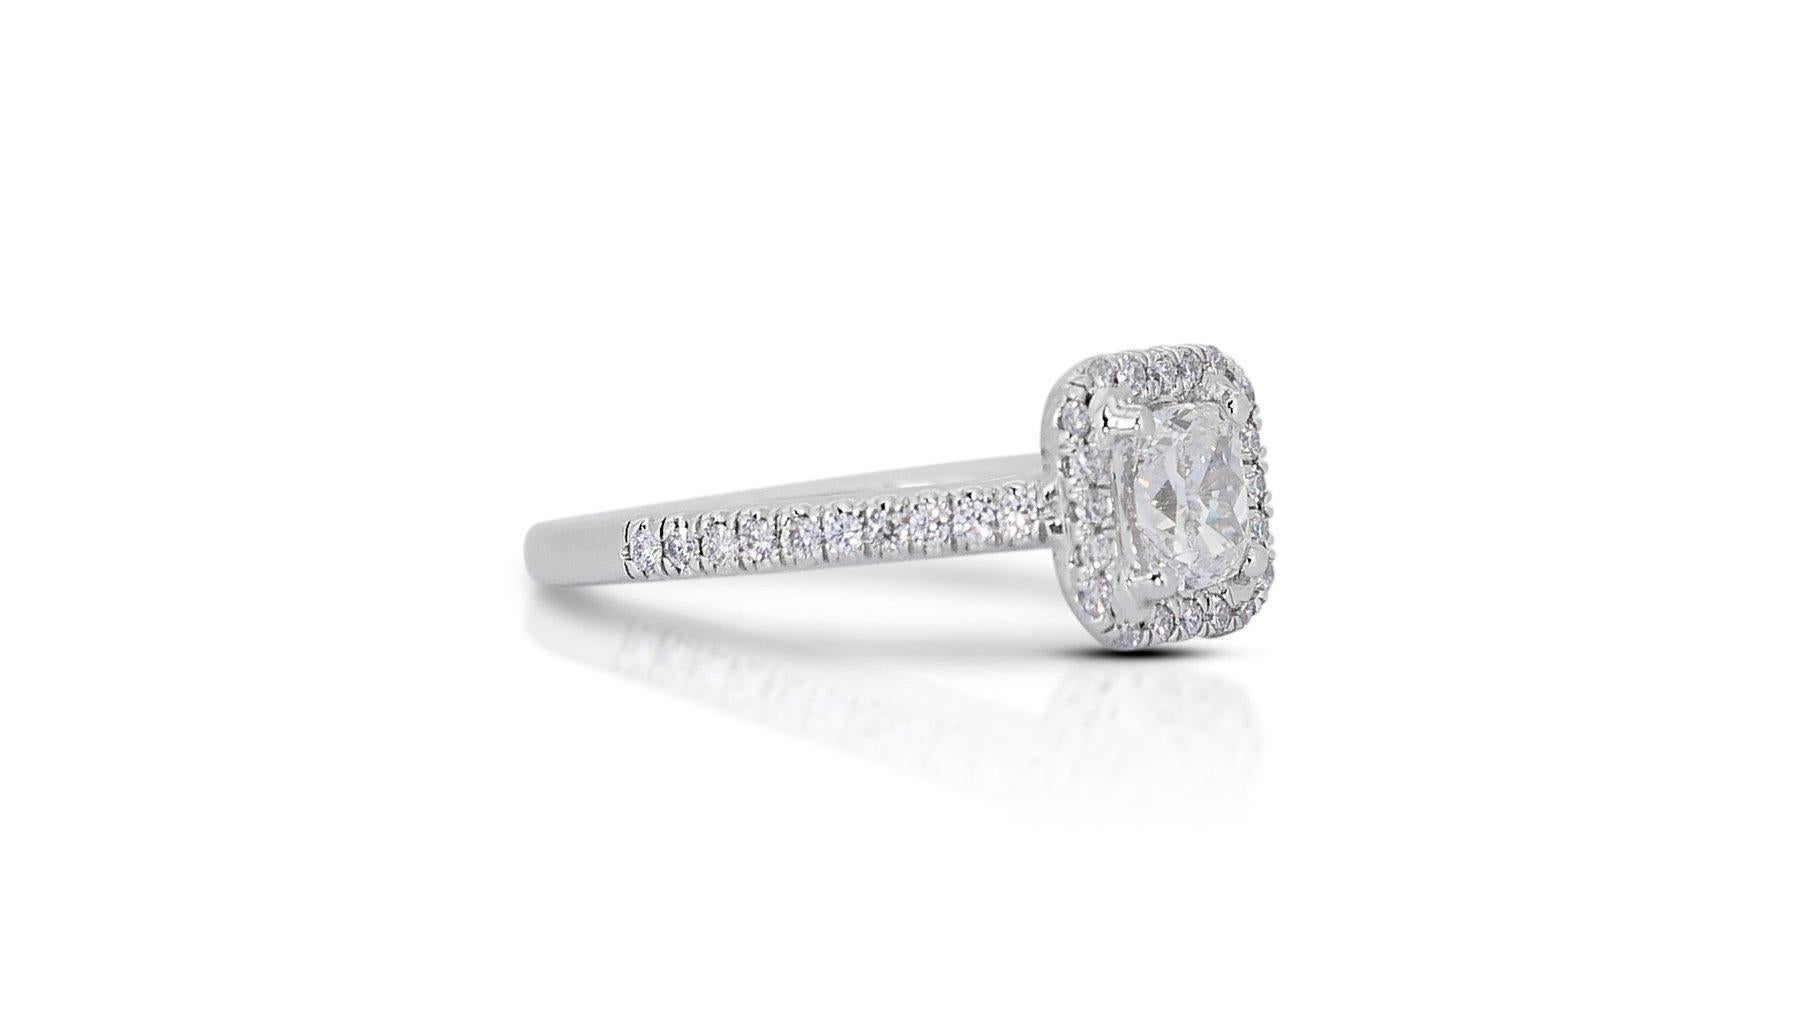 Majestic 1.71ct Diamond Halo Ring in 18k White Gold - GIA Certified

This stunning diamond halo ring showcases a 1.11-carat cushion-cut diamond. Sparkling alongside it are 40 dazzling round brilliant cut diamonds with a total carat weight of 0.60,